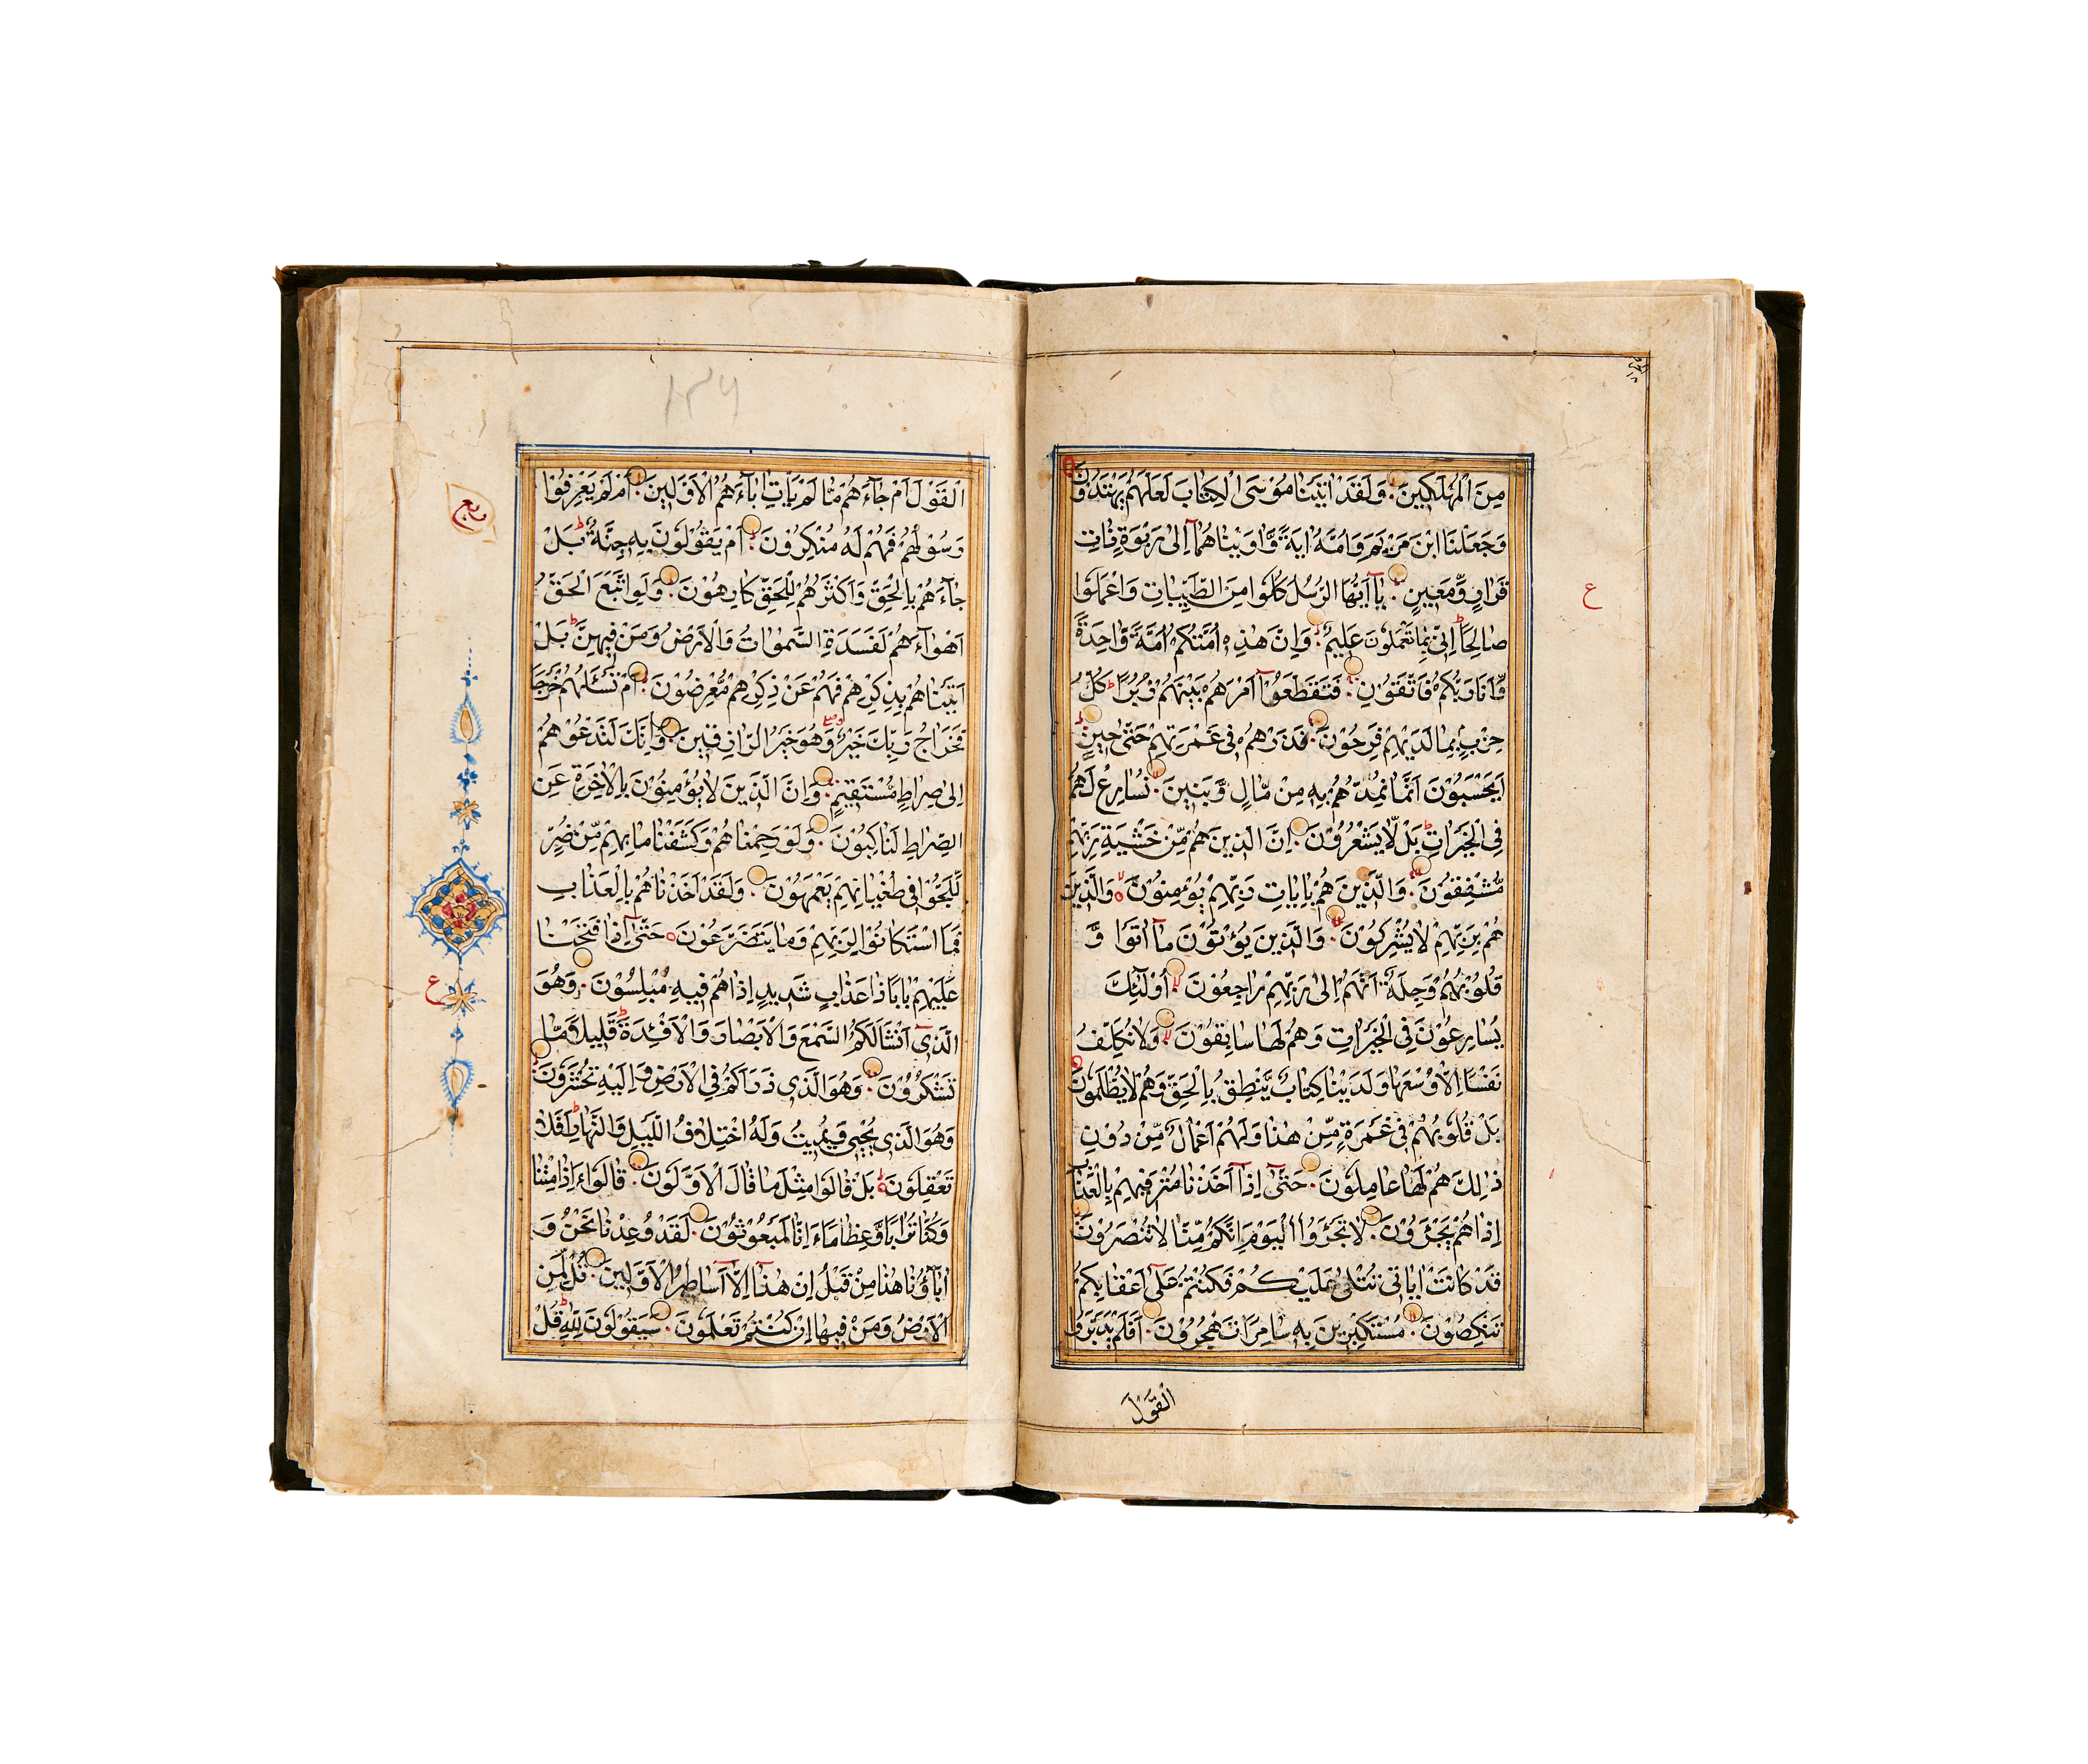 AN ILLUMINATED QUR’AN, NORTH INDIA, KASHMIR, 19TH CENTURY - Image 6 of 10